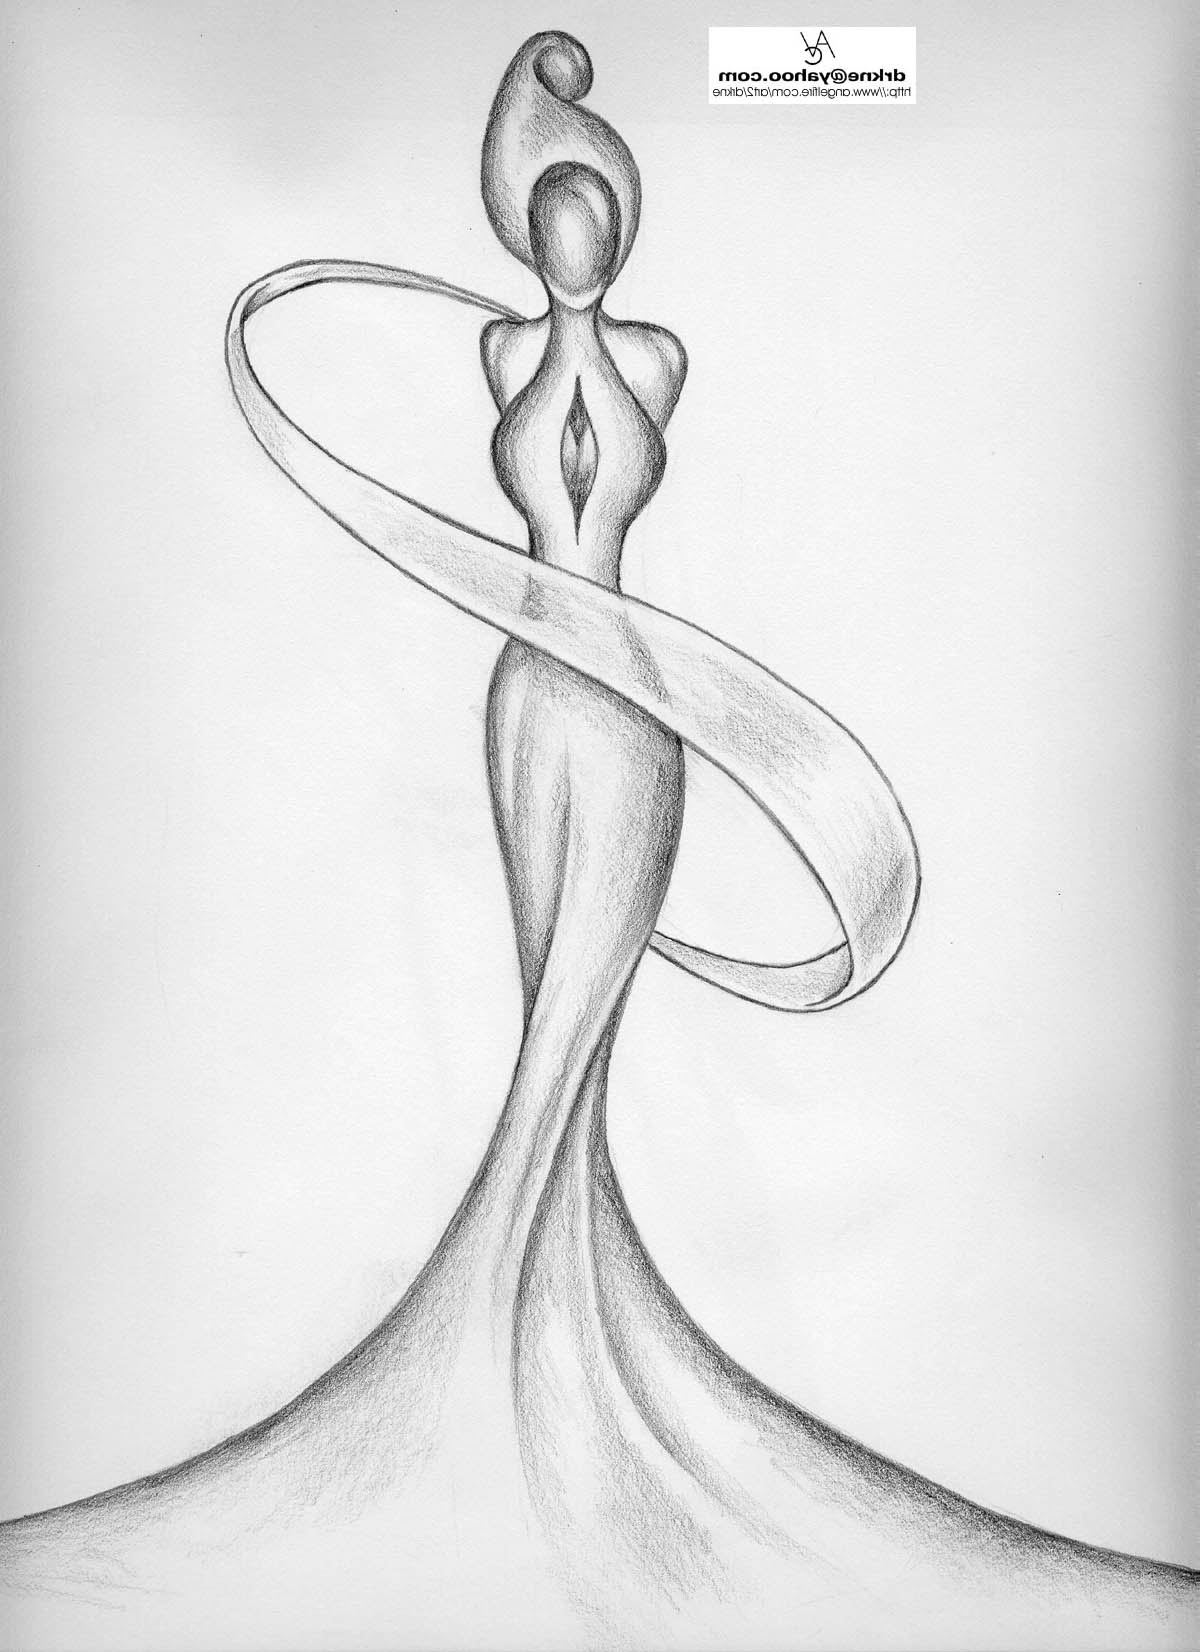 Abstract Pencil Drawings at Explore collection of